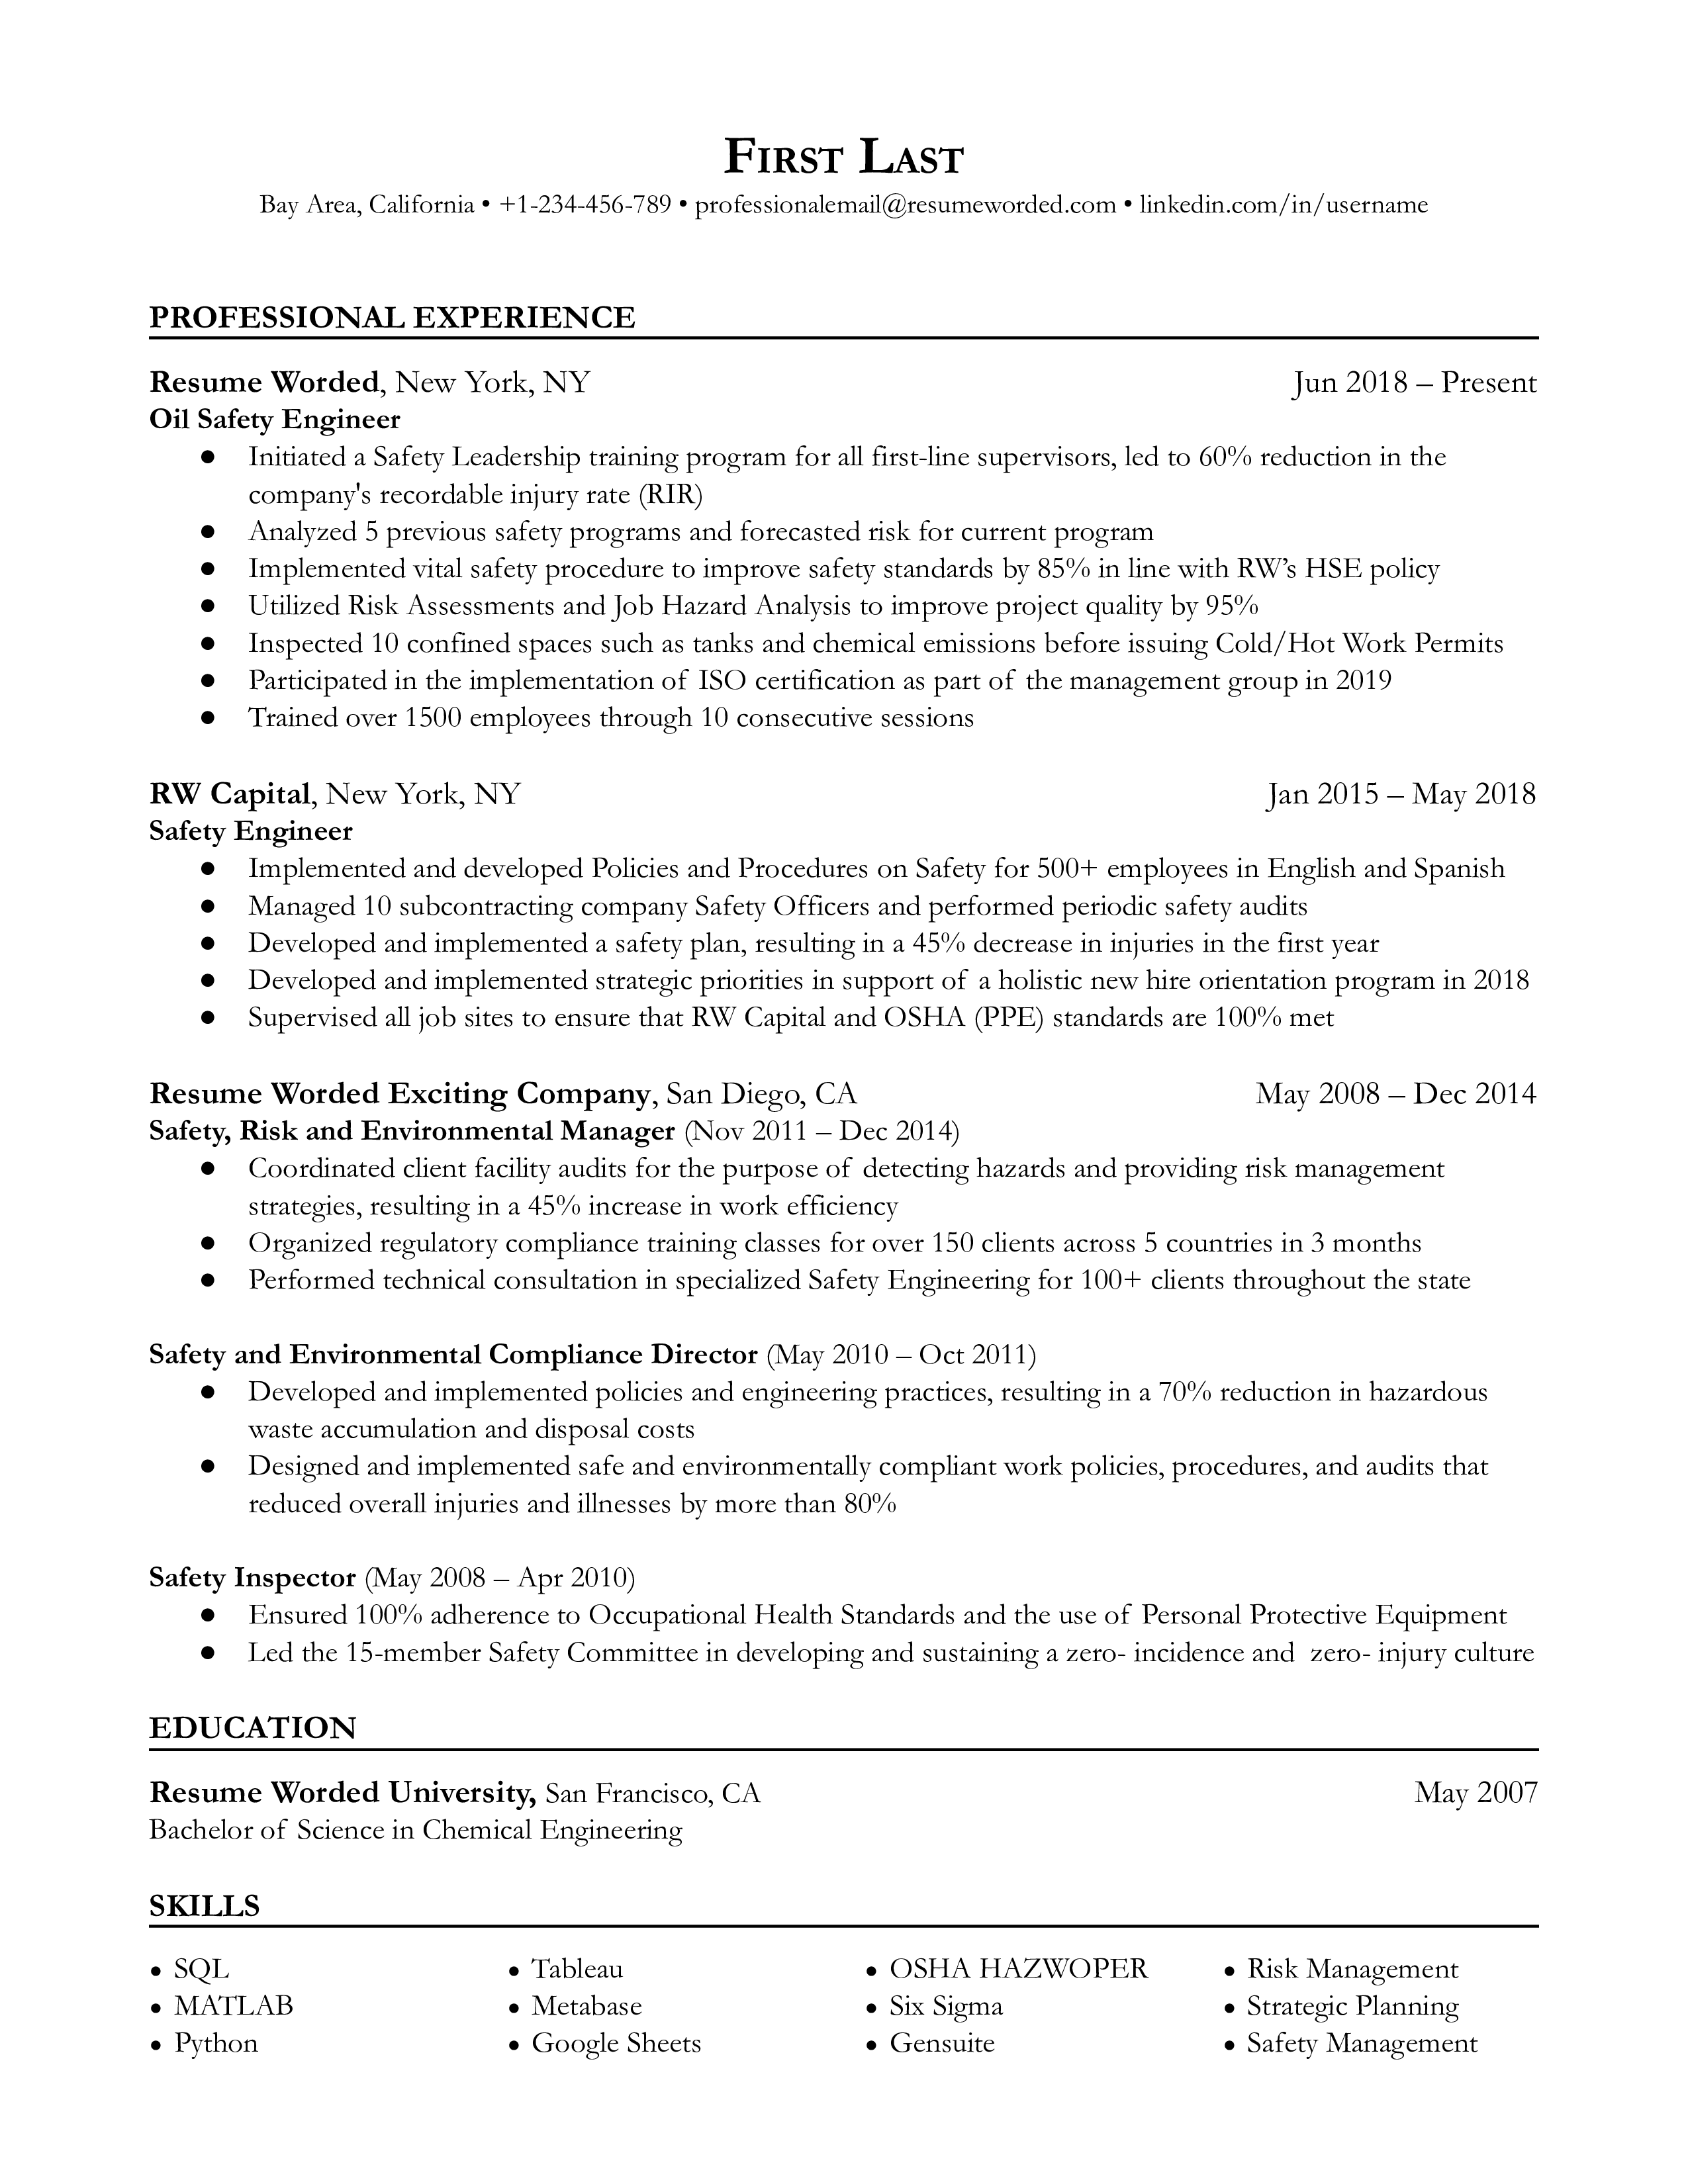 A oil safety engineer resume template that emphasizes work history. 